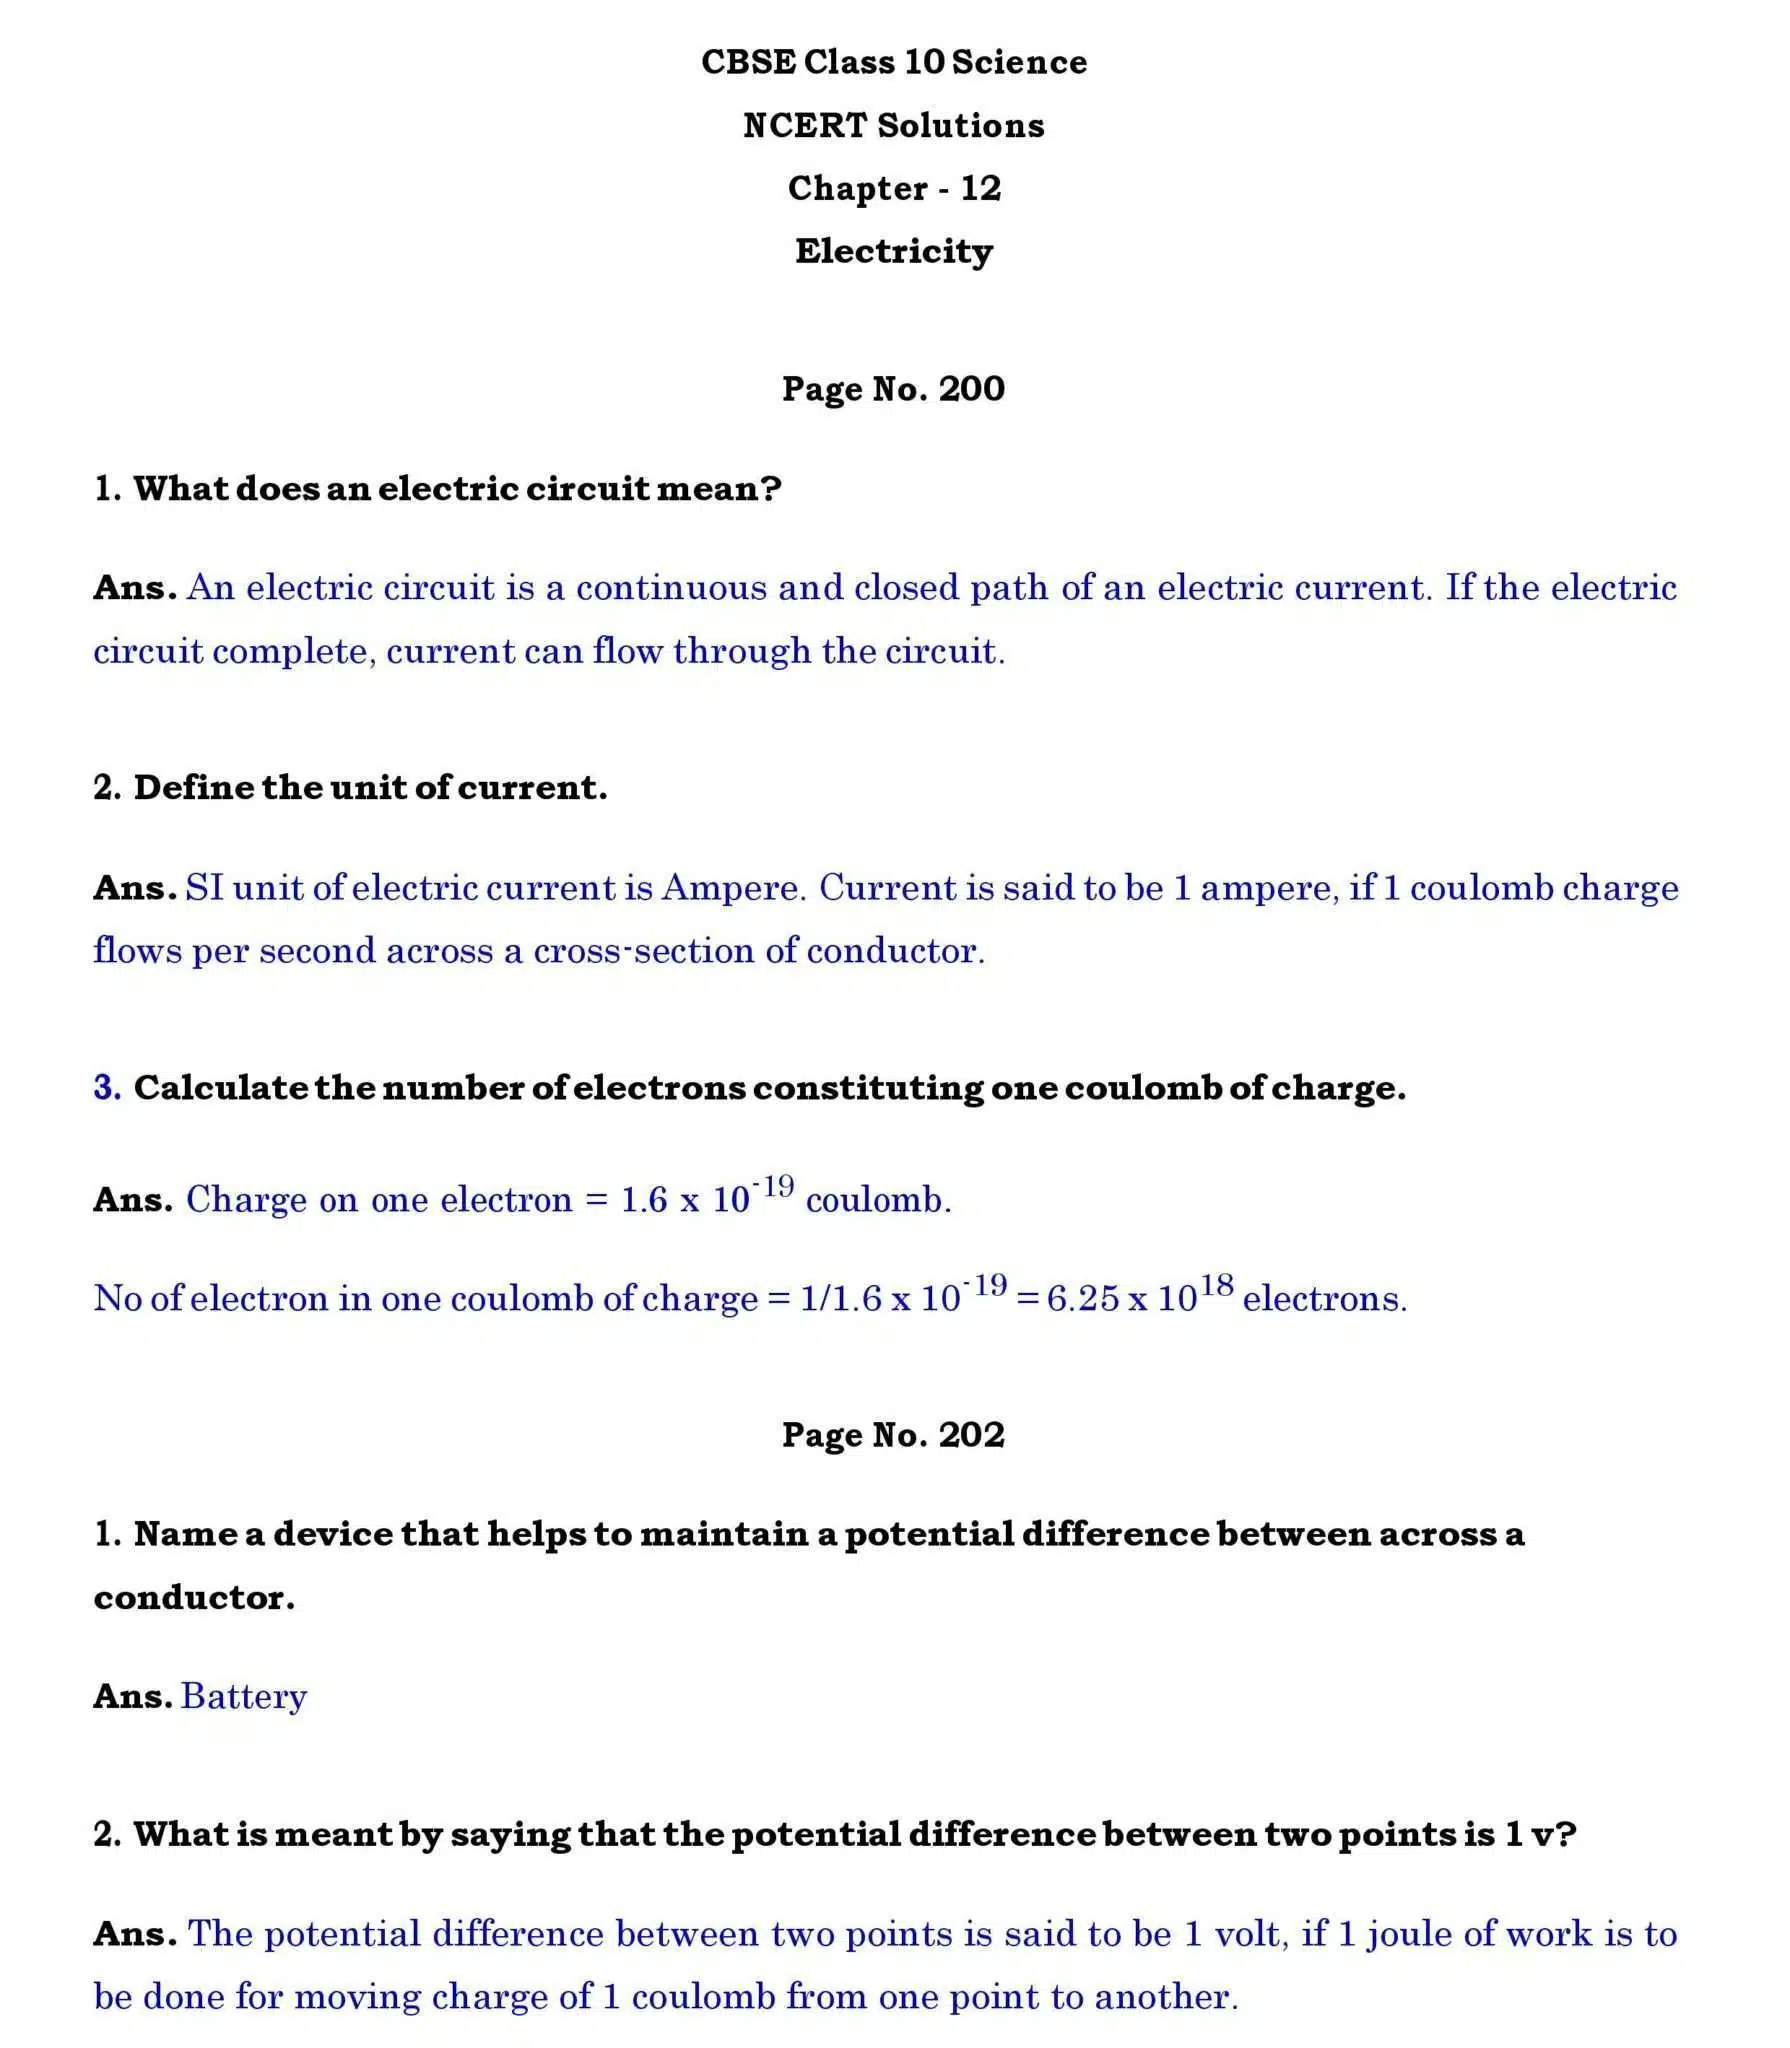 Ch 12 Science Electricity page 001